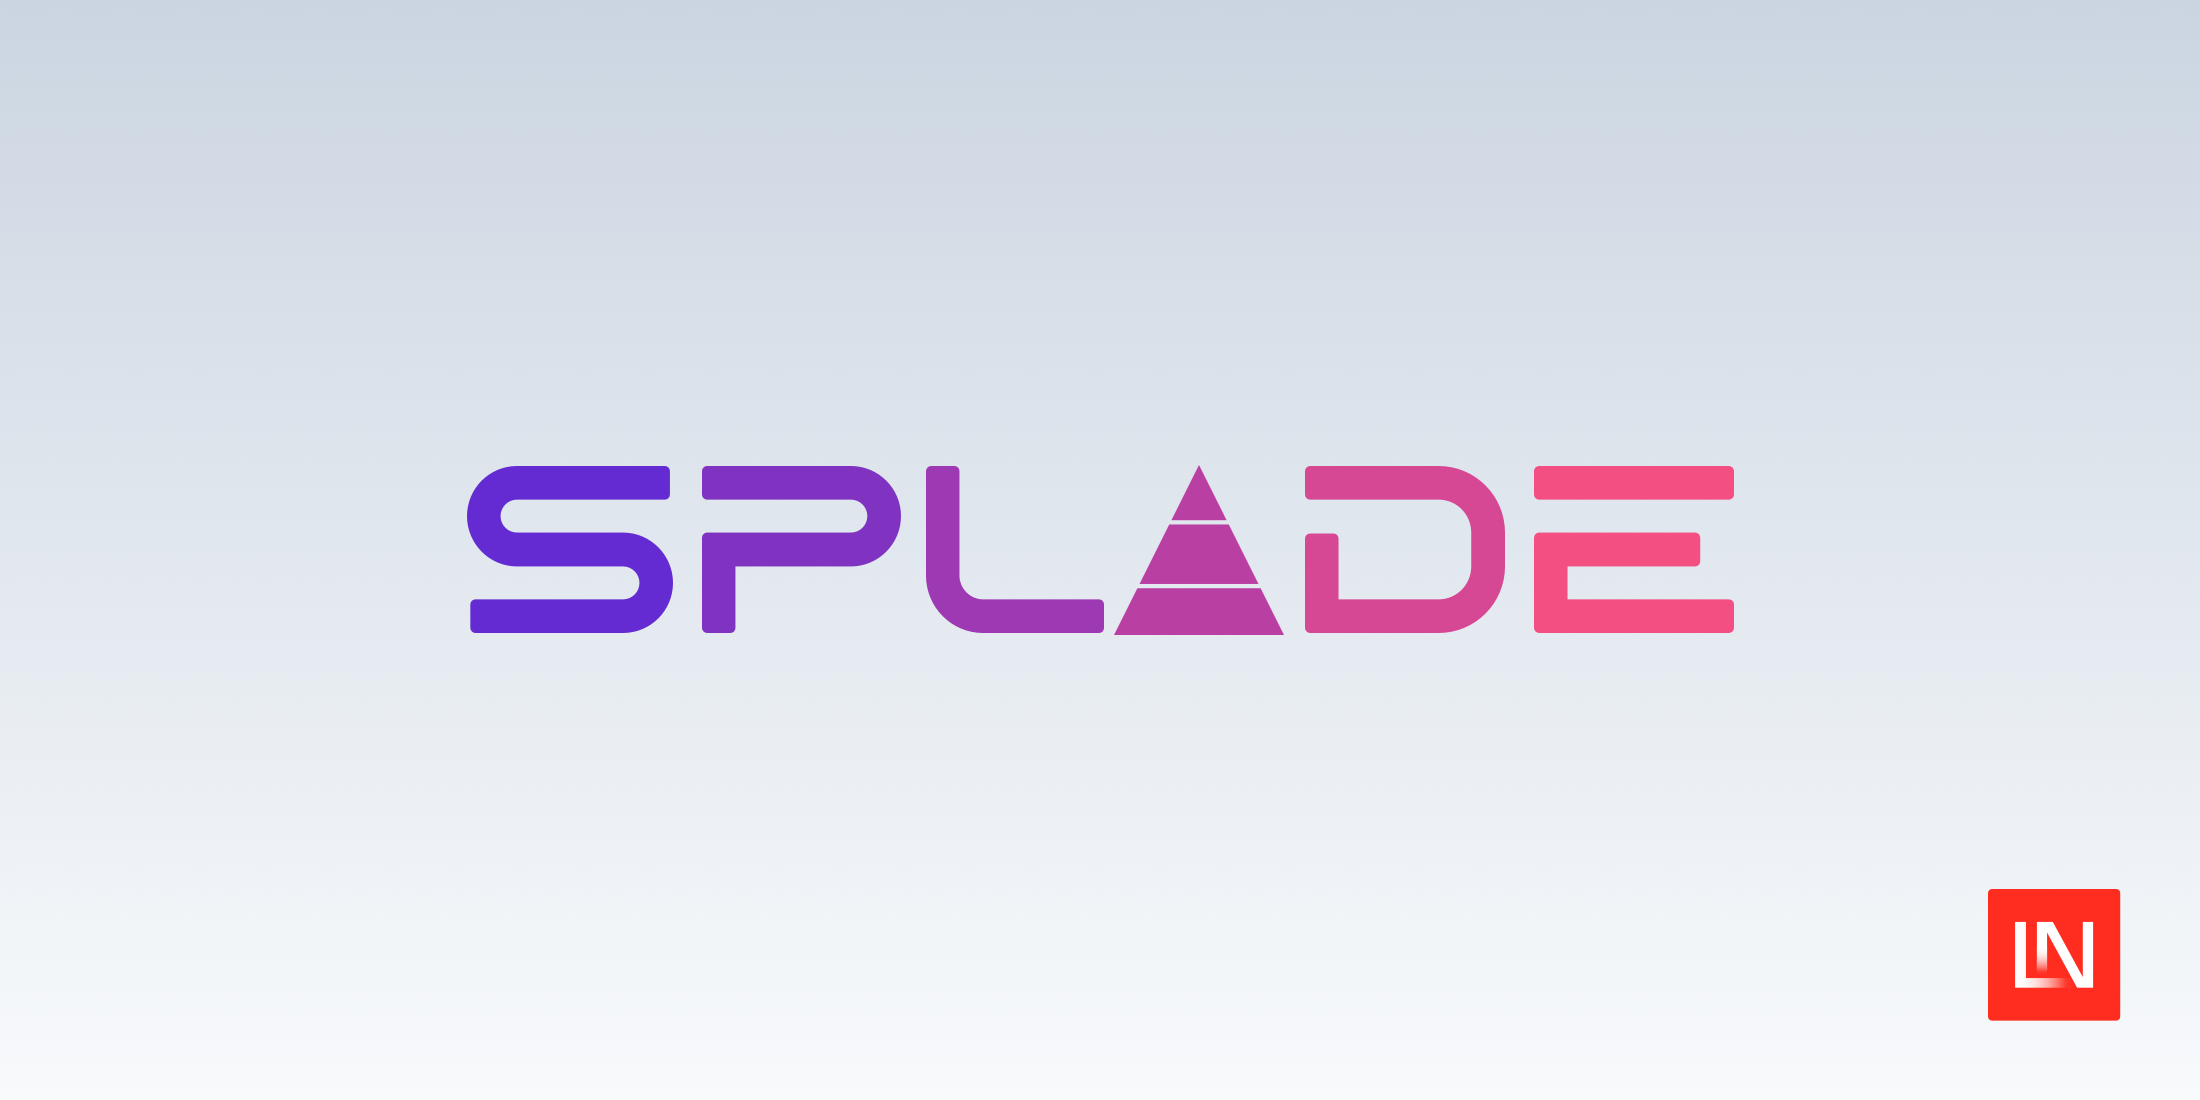 Introducing the Next Chapter of Splade